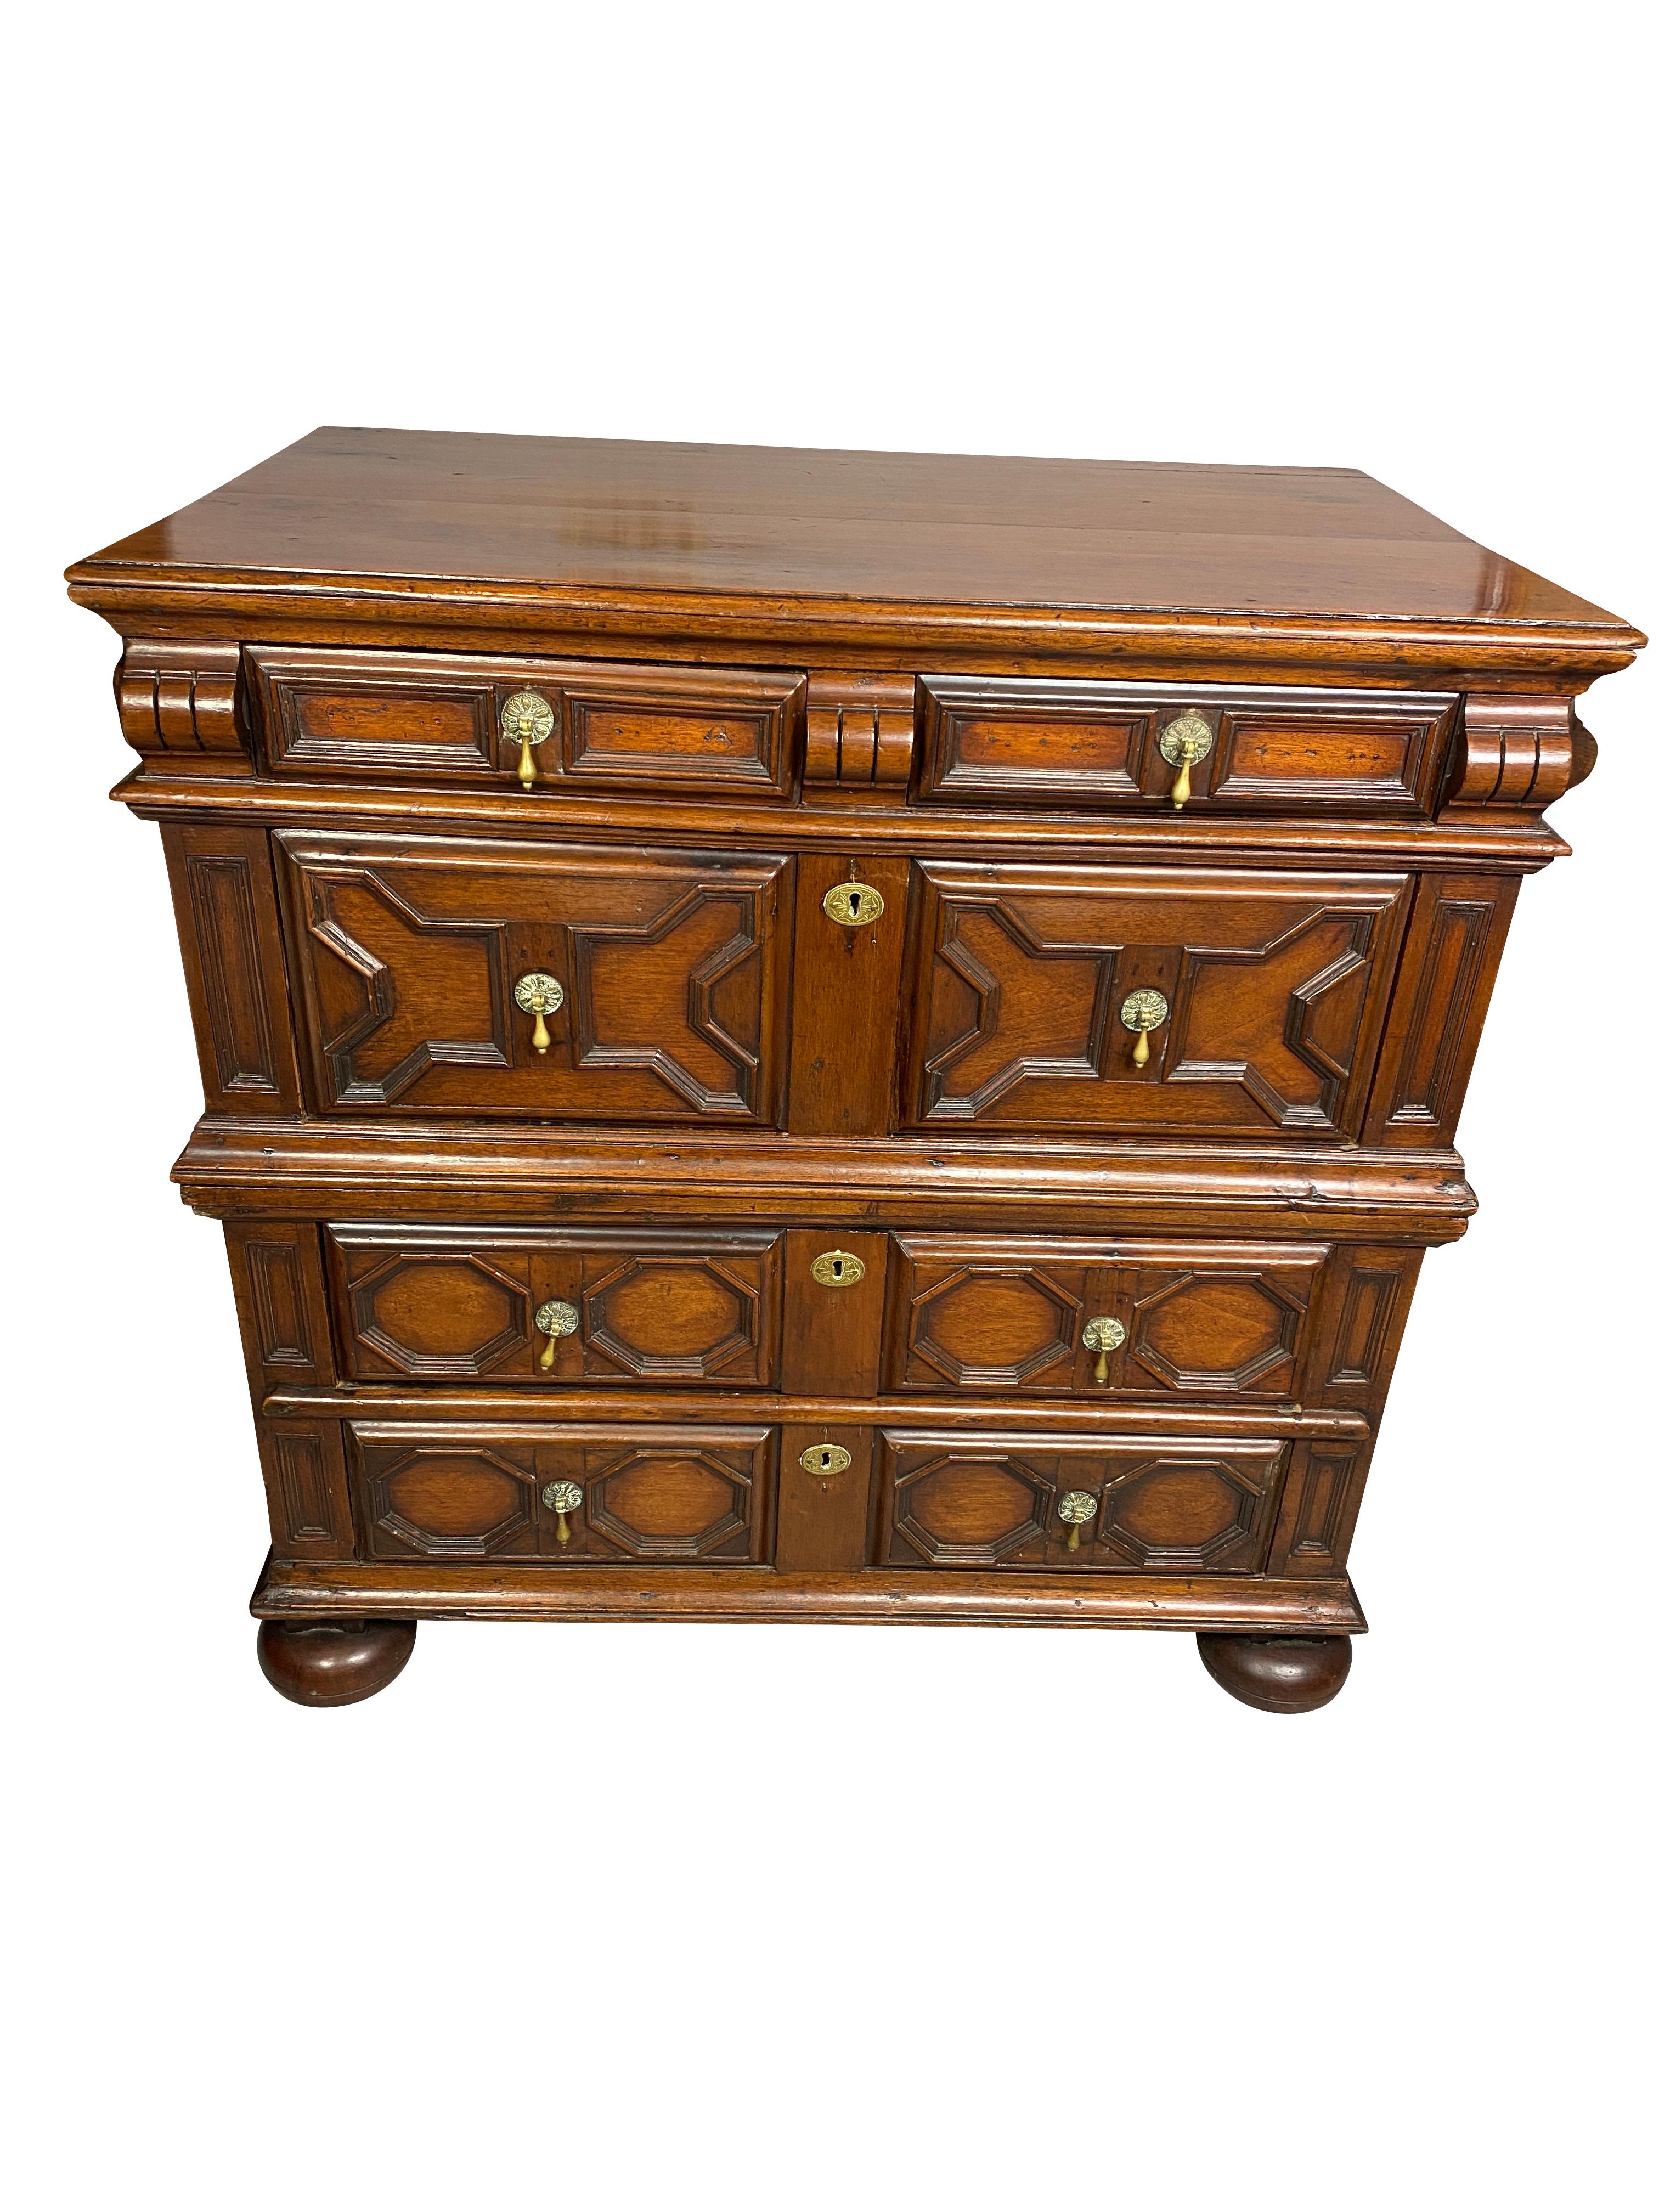 This form is usually oak. With rectangular top over a long shallow drawer over three geometric paneled drawers, sides paneled, bun feet. This chest is in two parts for easy moving and getting into tight spots.